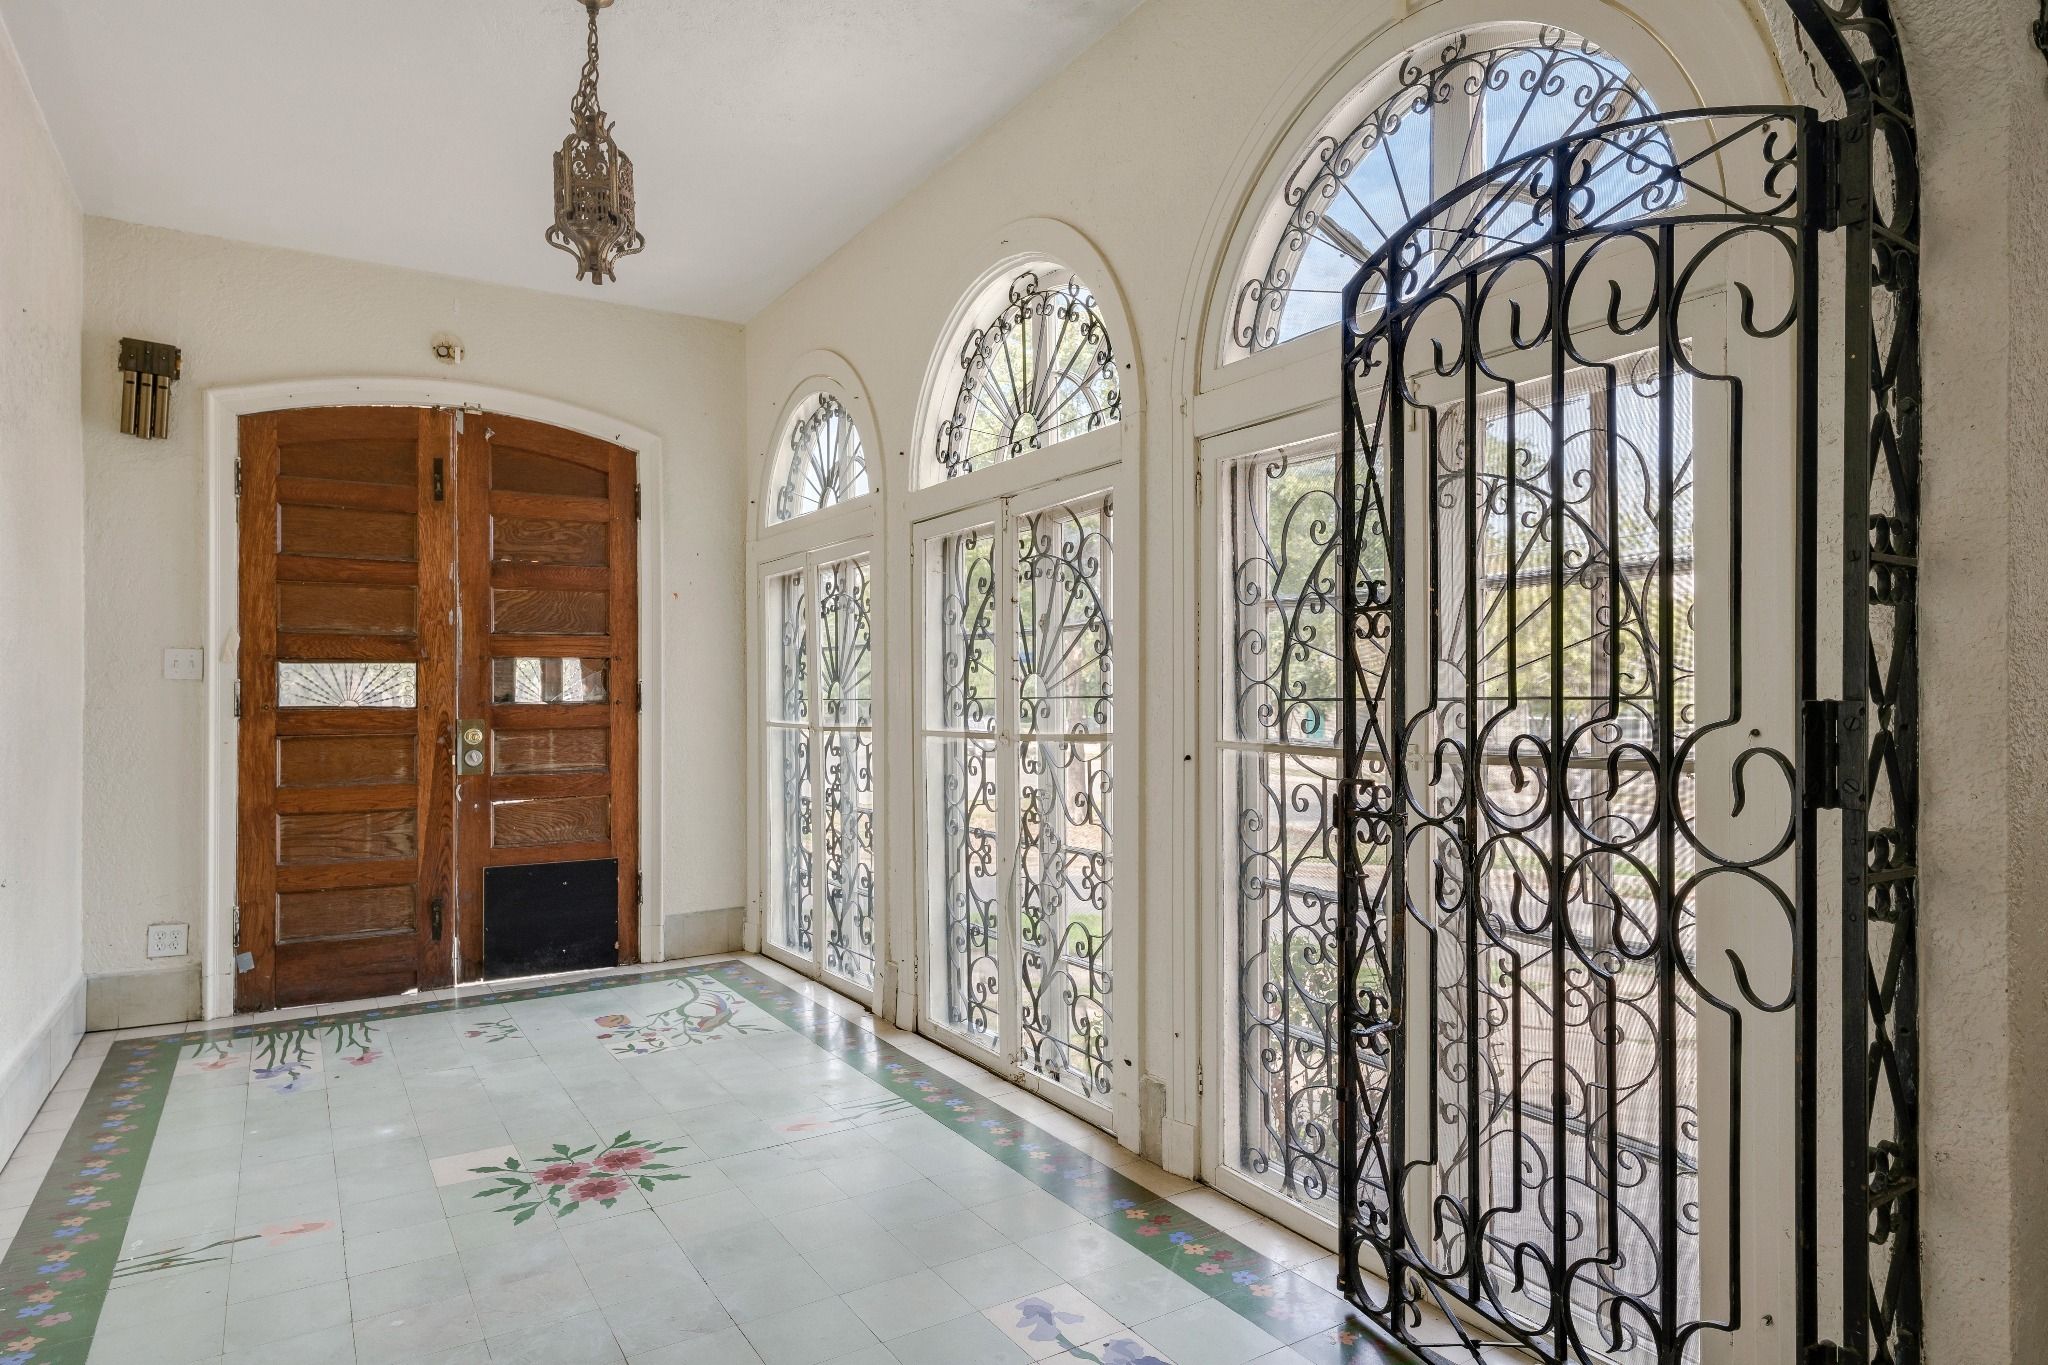 An entryway to a historic home with tall windows and iron accents, and a floral patterned floor.